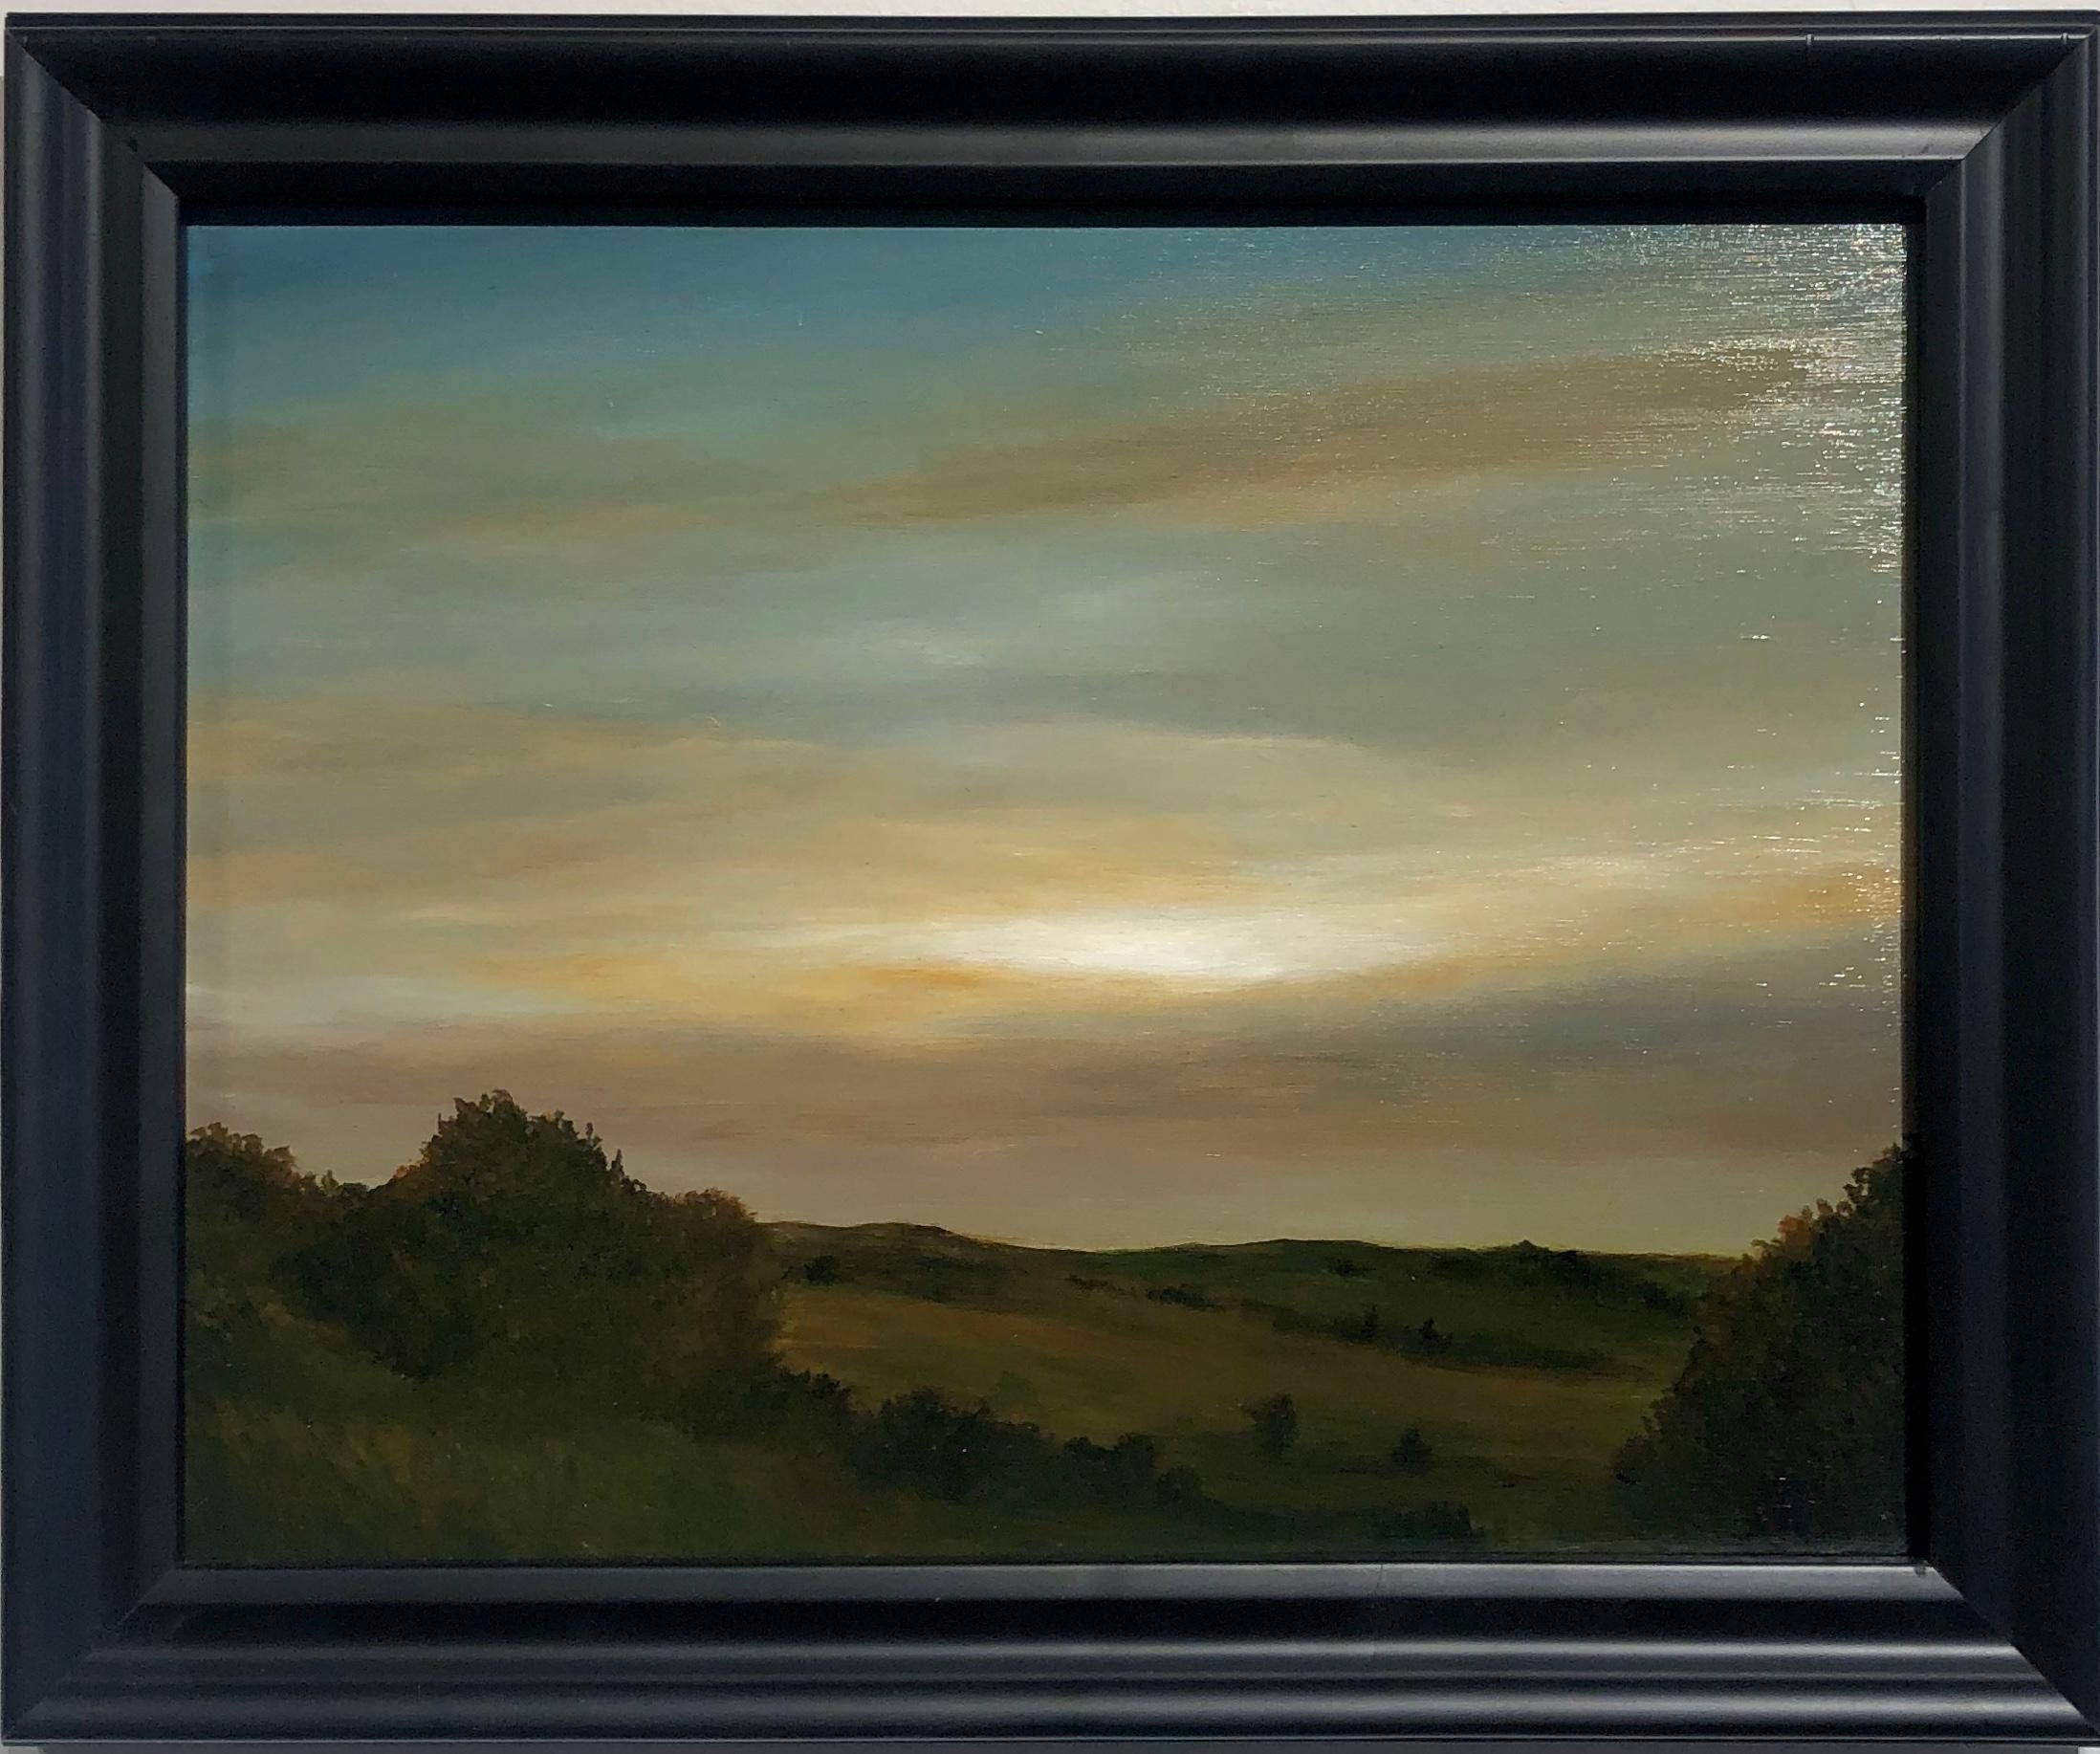 Light Above the Hills, Serene Landscape , Sun Peaking Thought Hazy Sky, Framed - Painting by Ahzad Bogosian